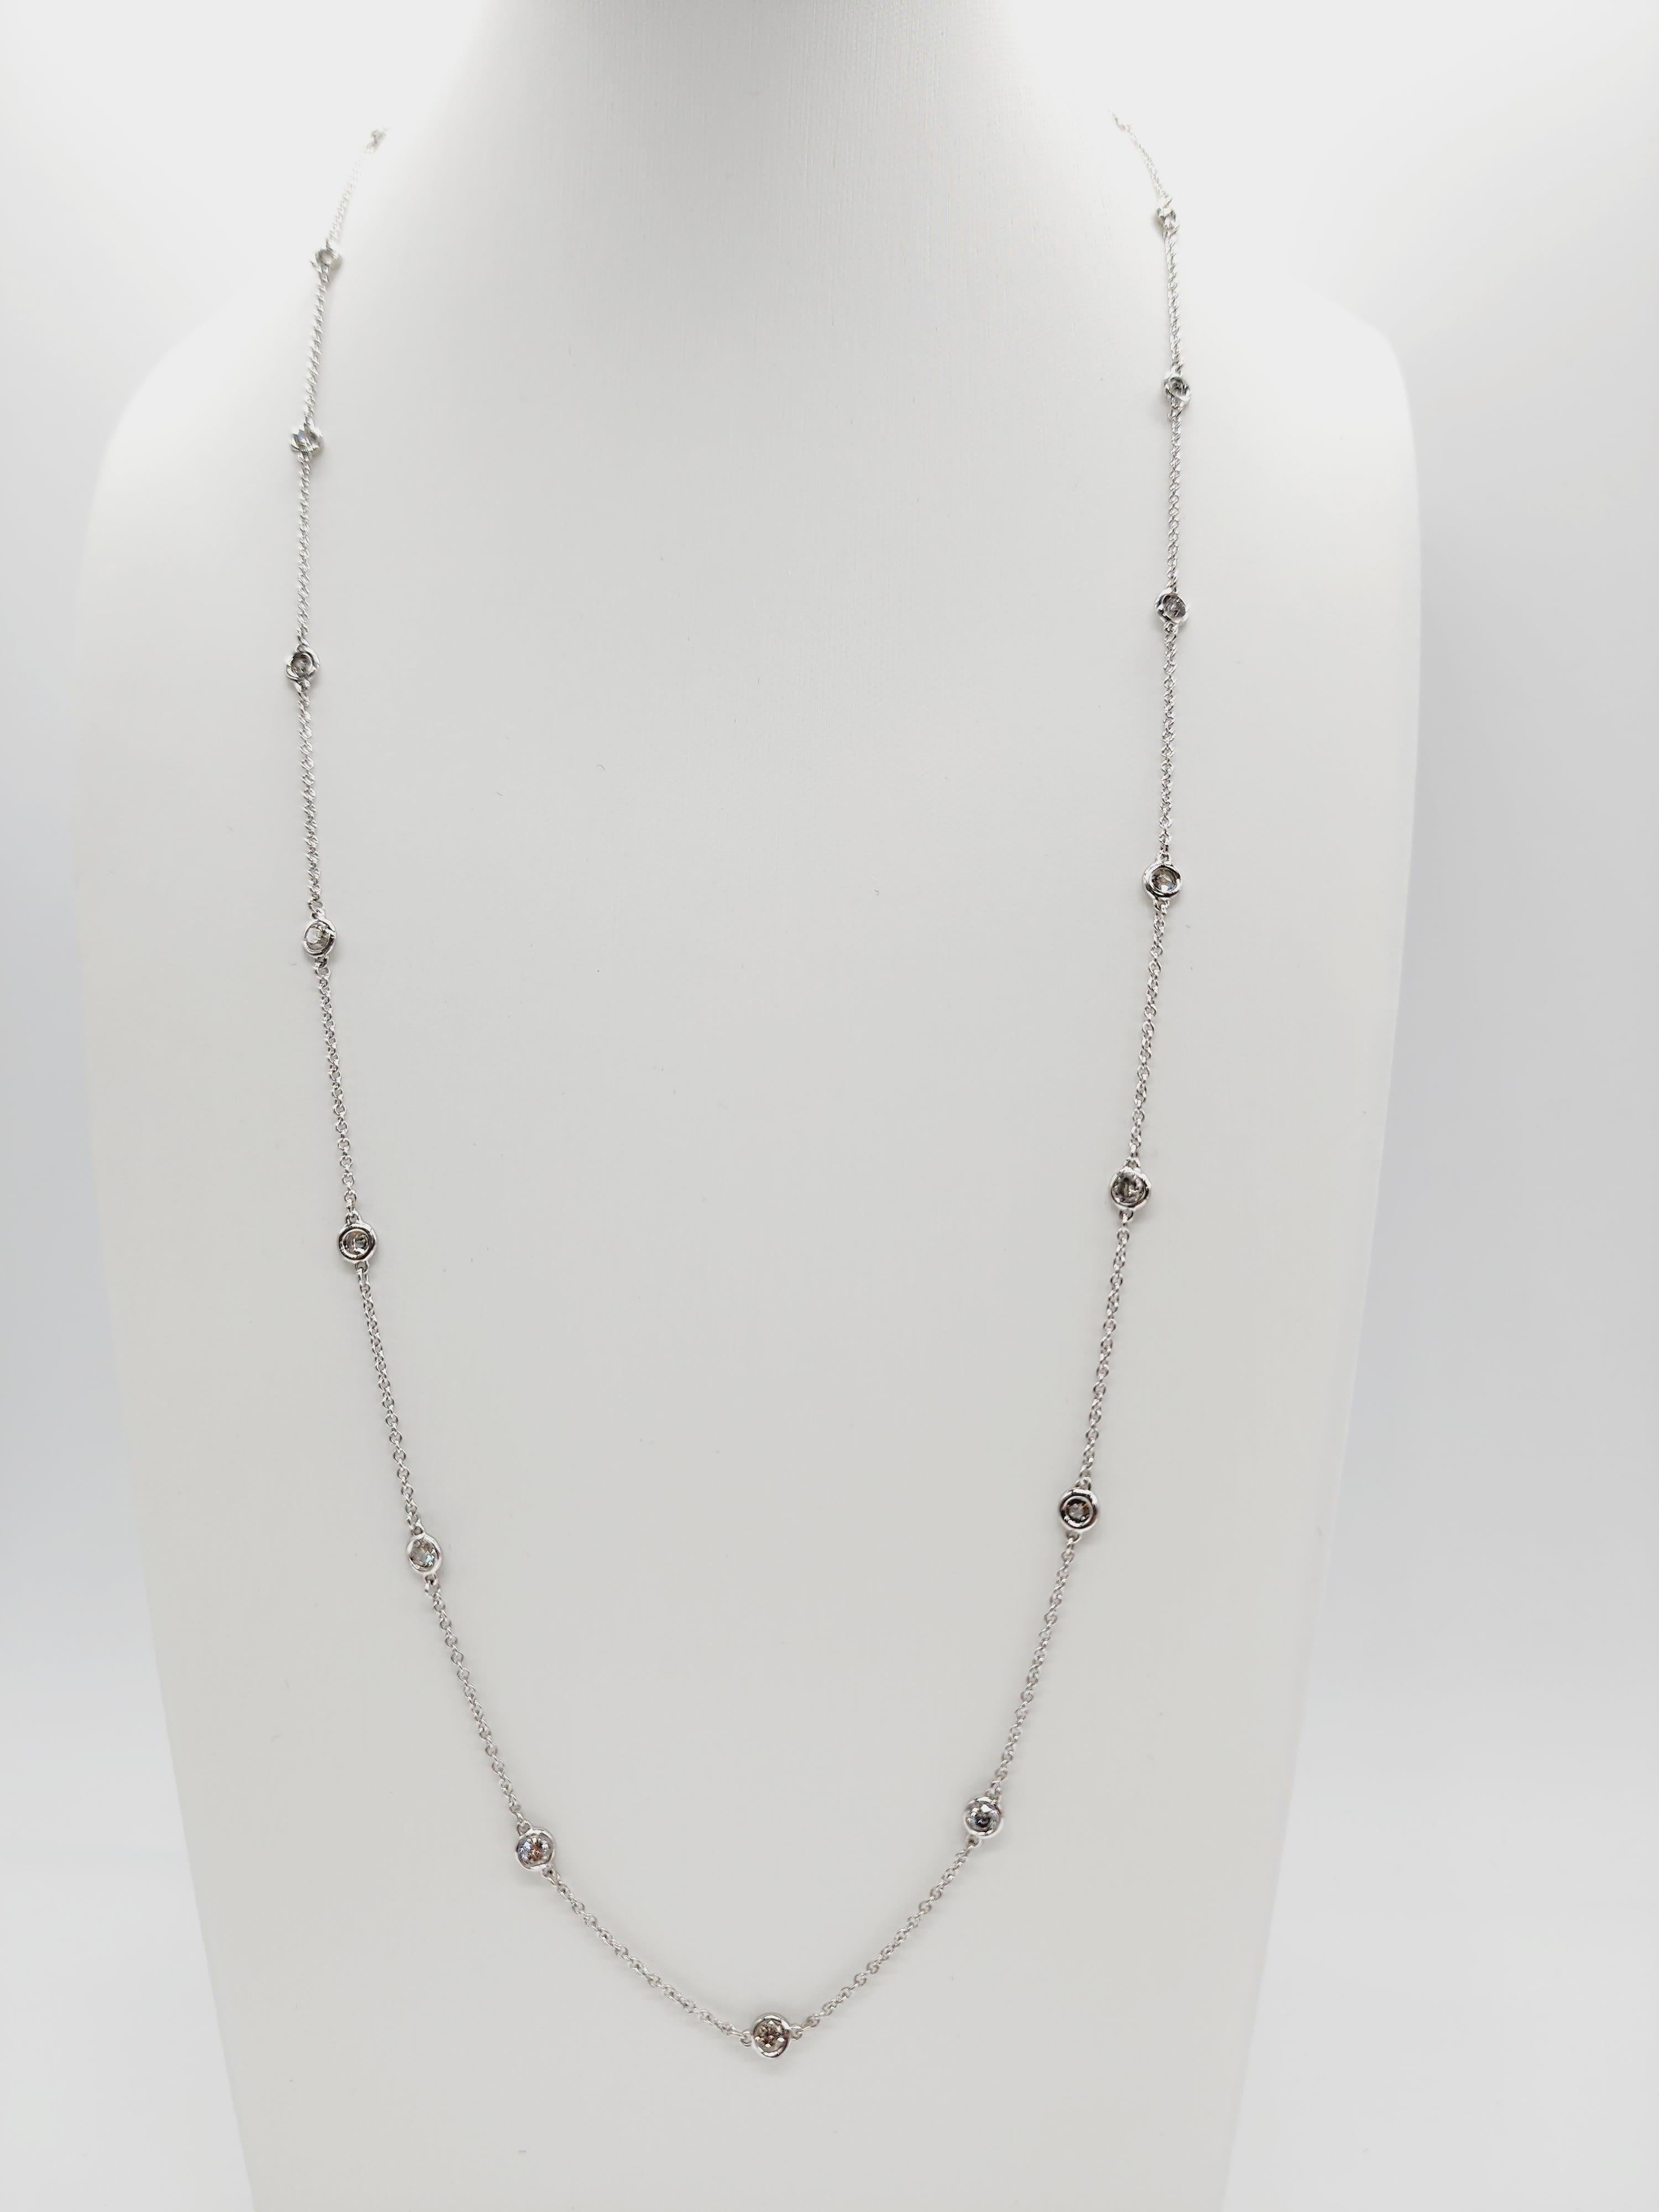 19 Station Diamond by the yard necklace set in Italian made 14K white gold. 
The total weight is 1.55 carats. The total length is 24 inch. Average G-I.

*Free shipping within the U.S.*